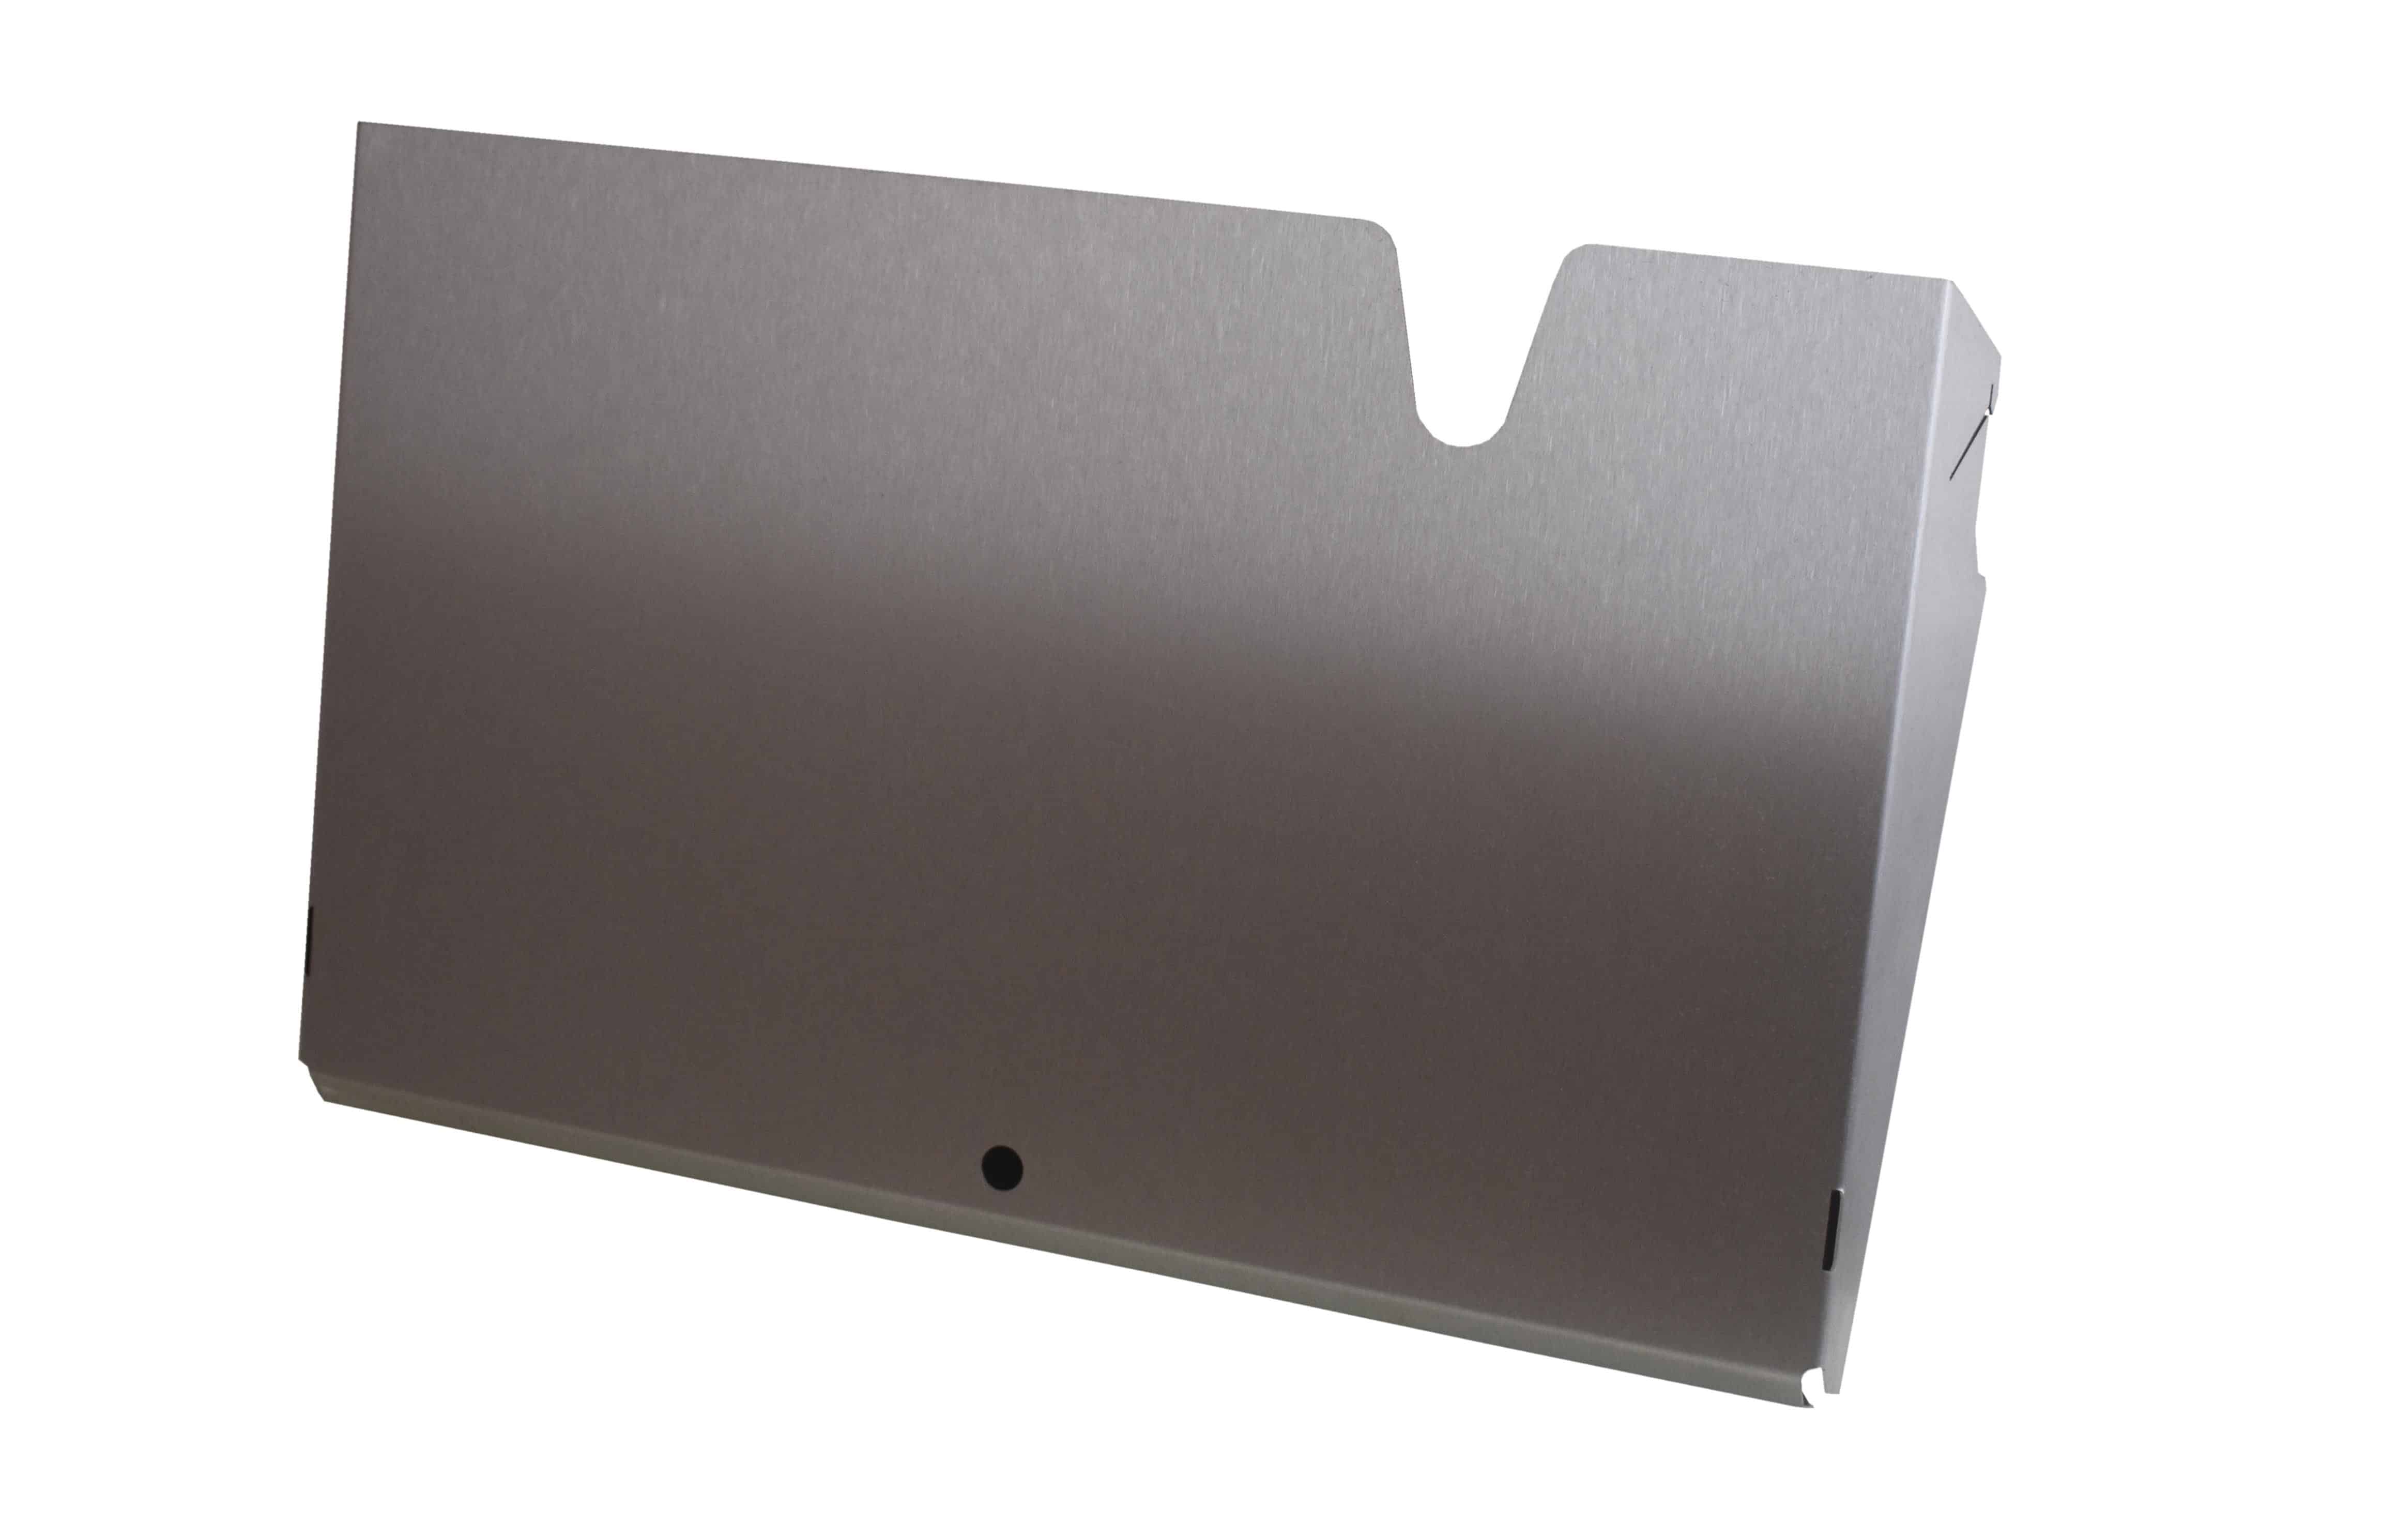 Wall mounted document holder (A3 landscape)